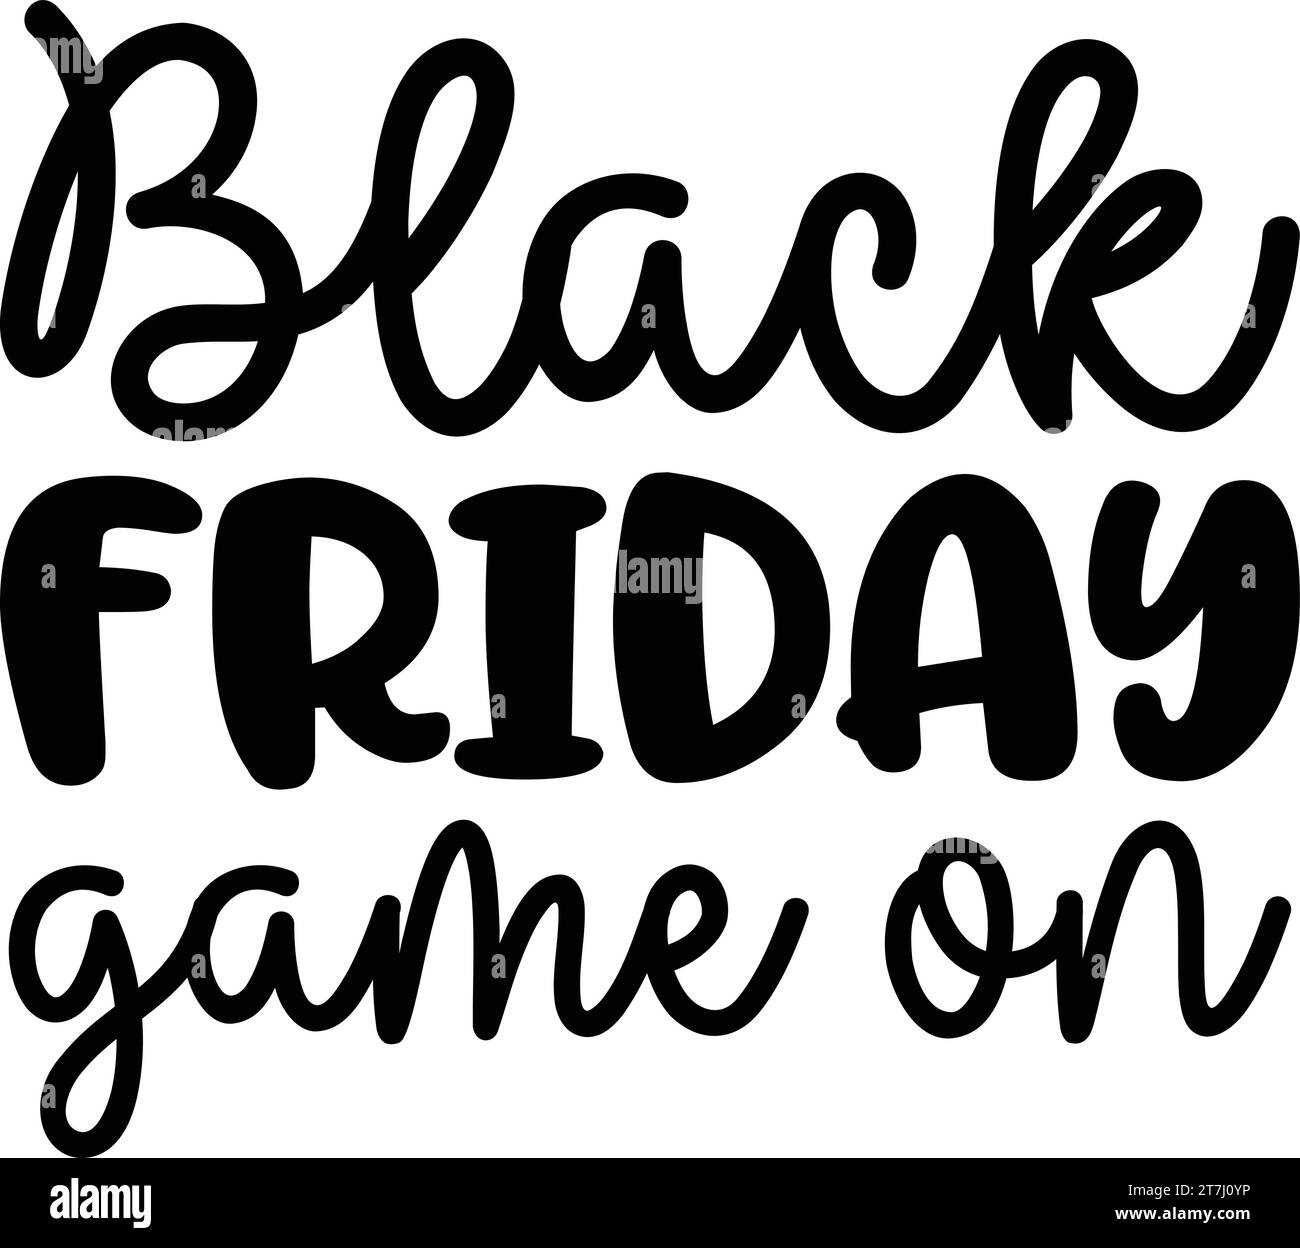 Black Friday Game on Stock Vector